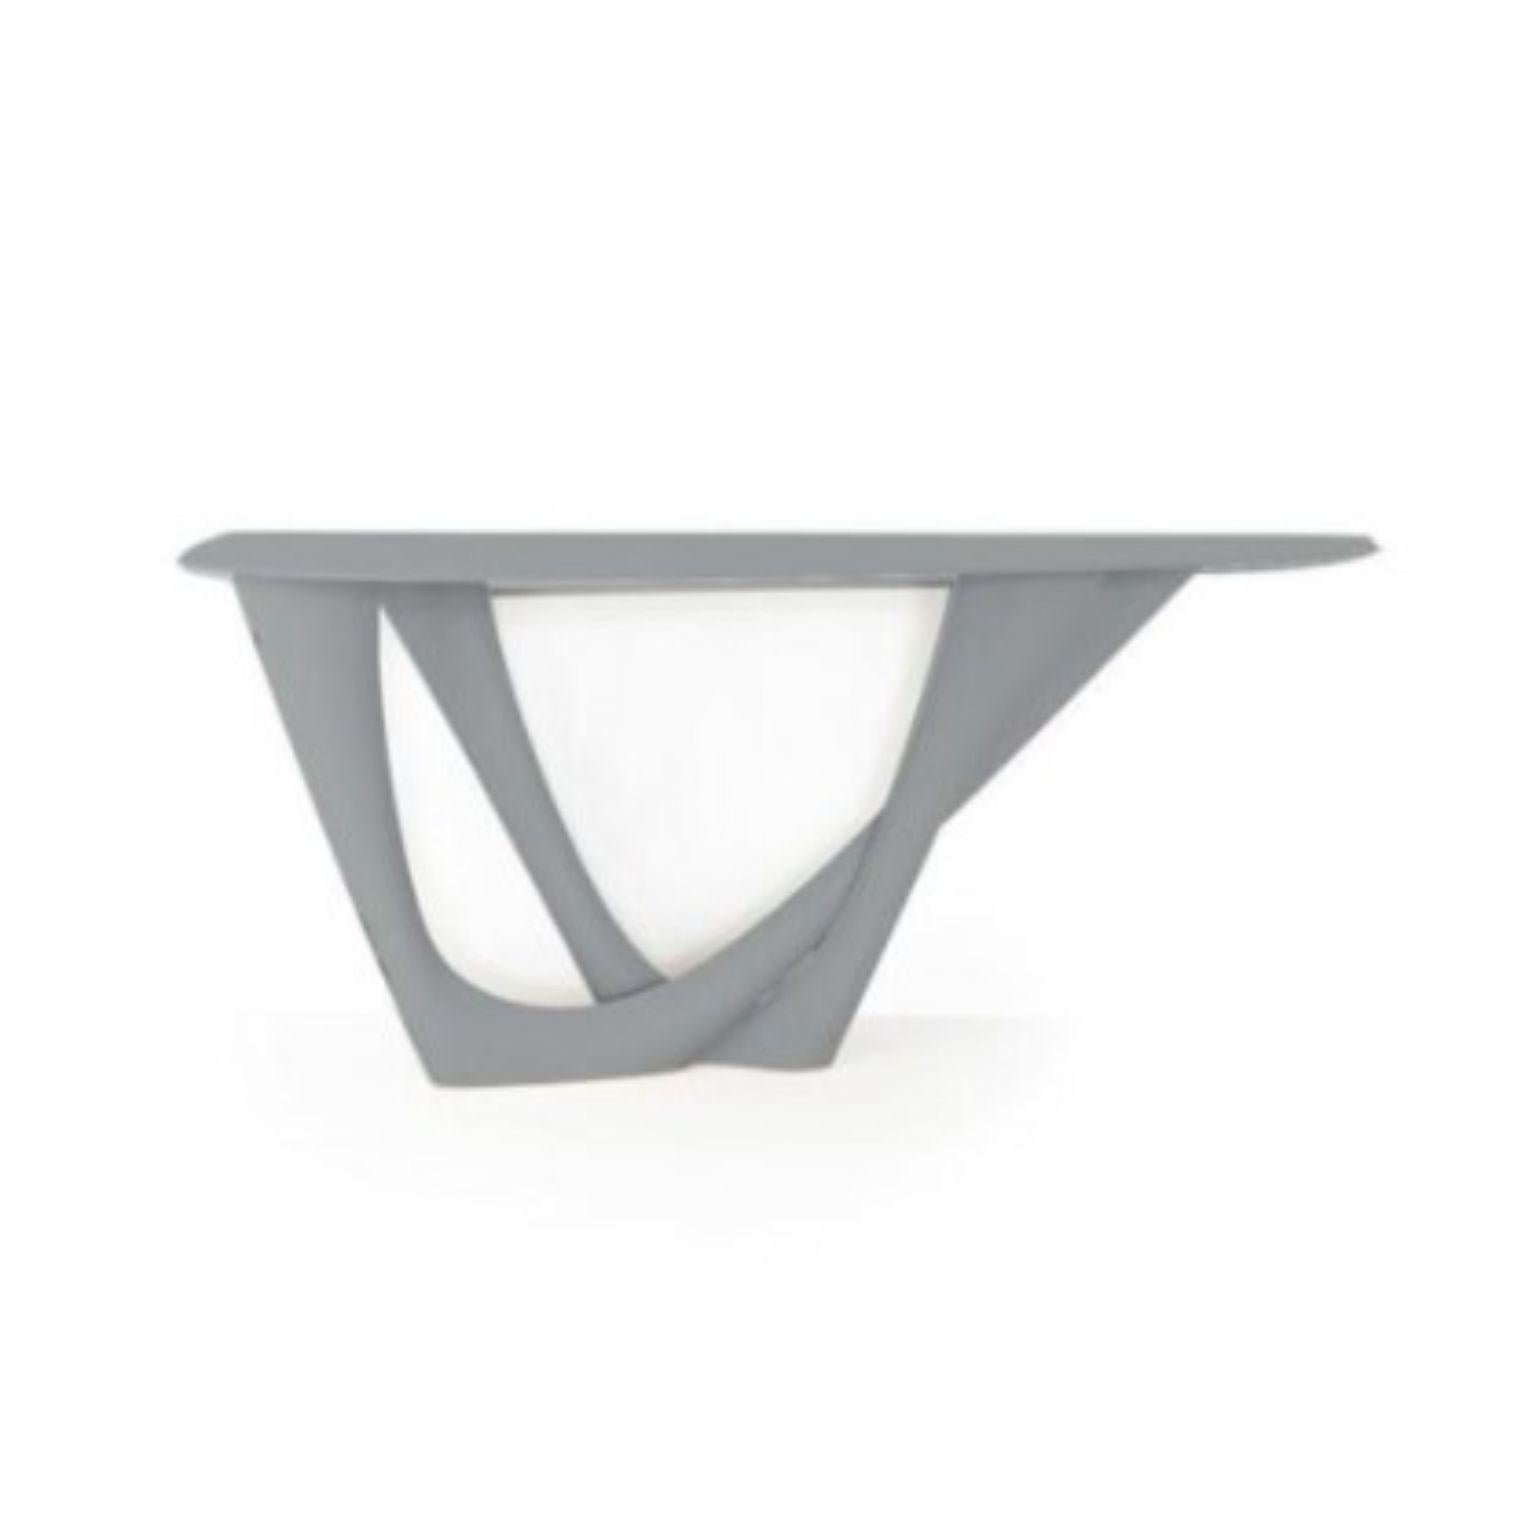 Tele grey G-Console duo steel base and top by Zieta
Dimensions: D 56 x W 168 x H 75 cm 
Material: Steel.
Also available in different colors and dimensions.

G-Console is another bionic object in our collection. Created for smaller spaces, it gives